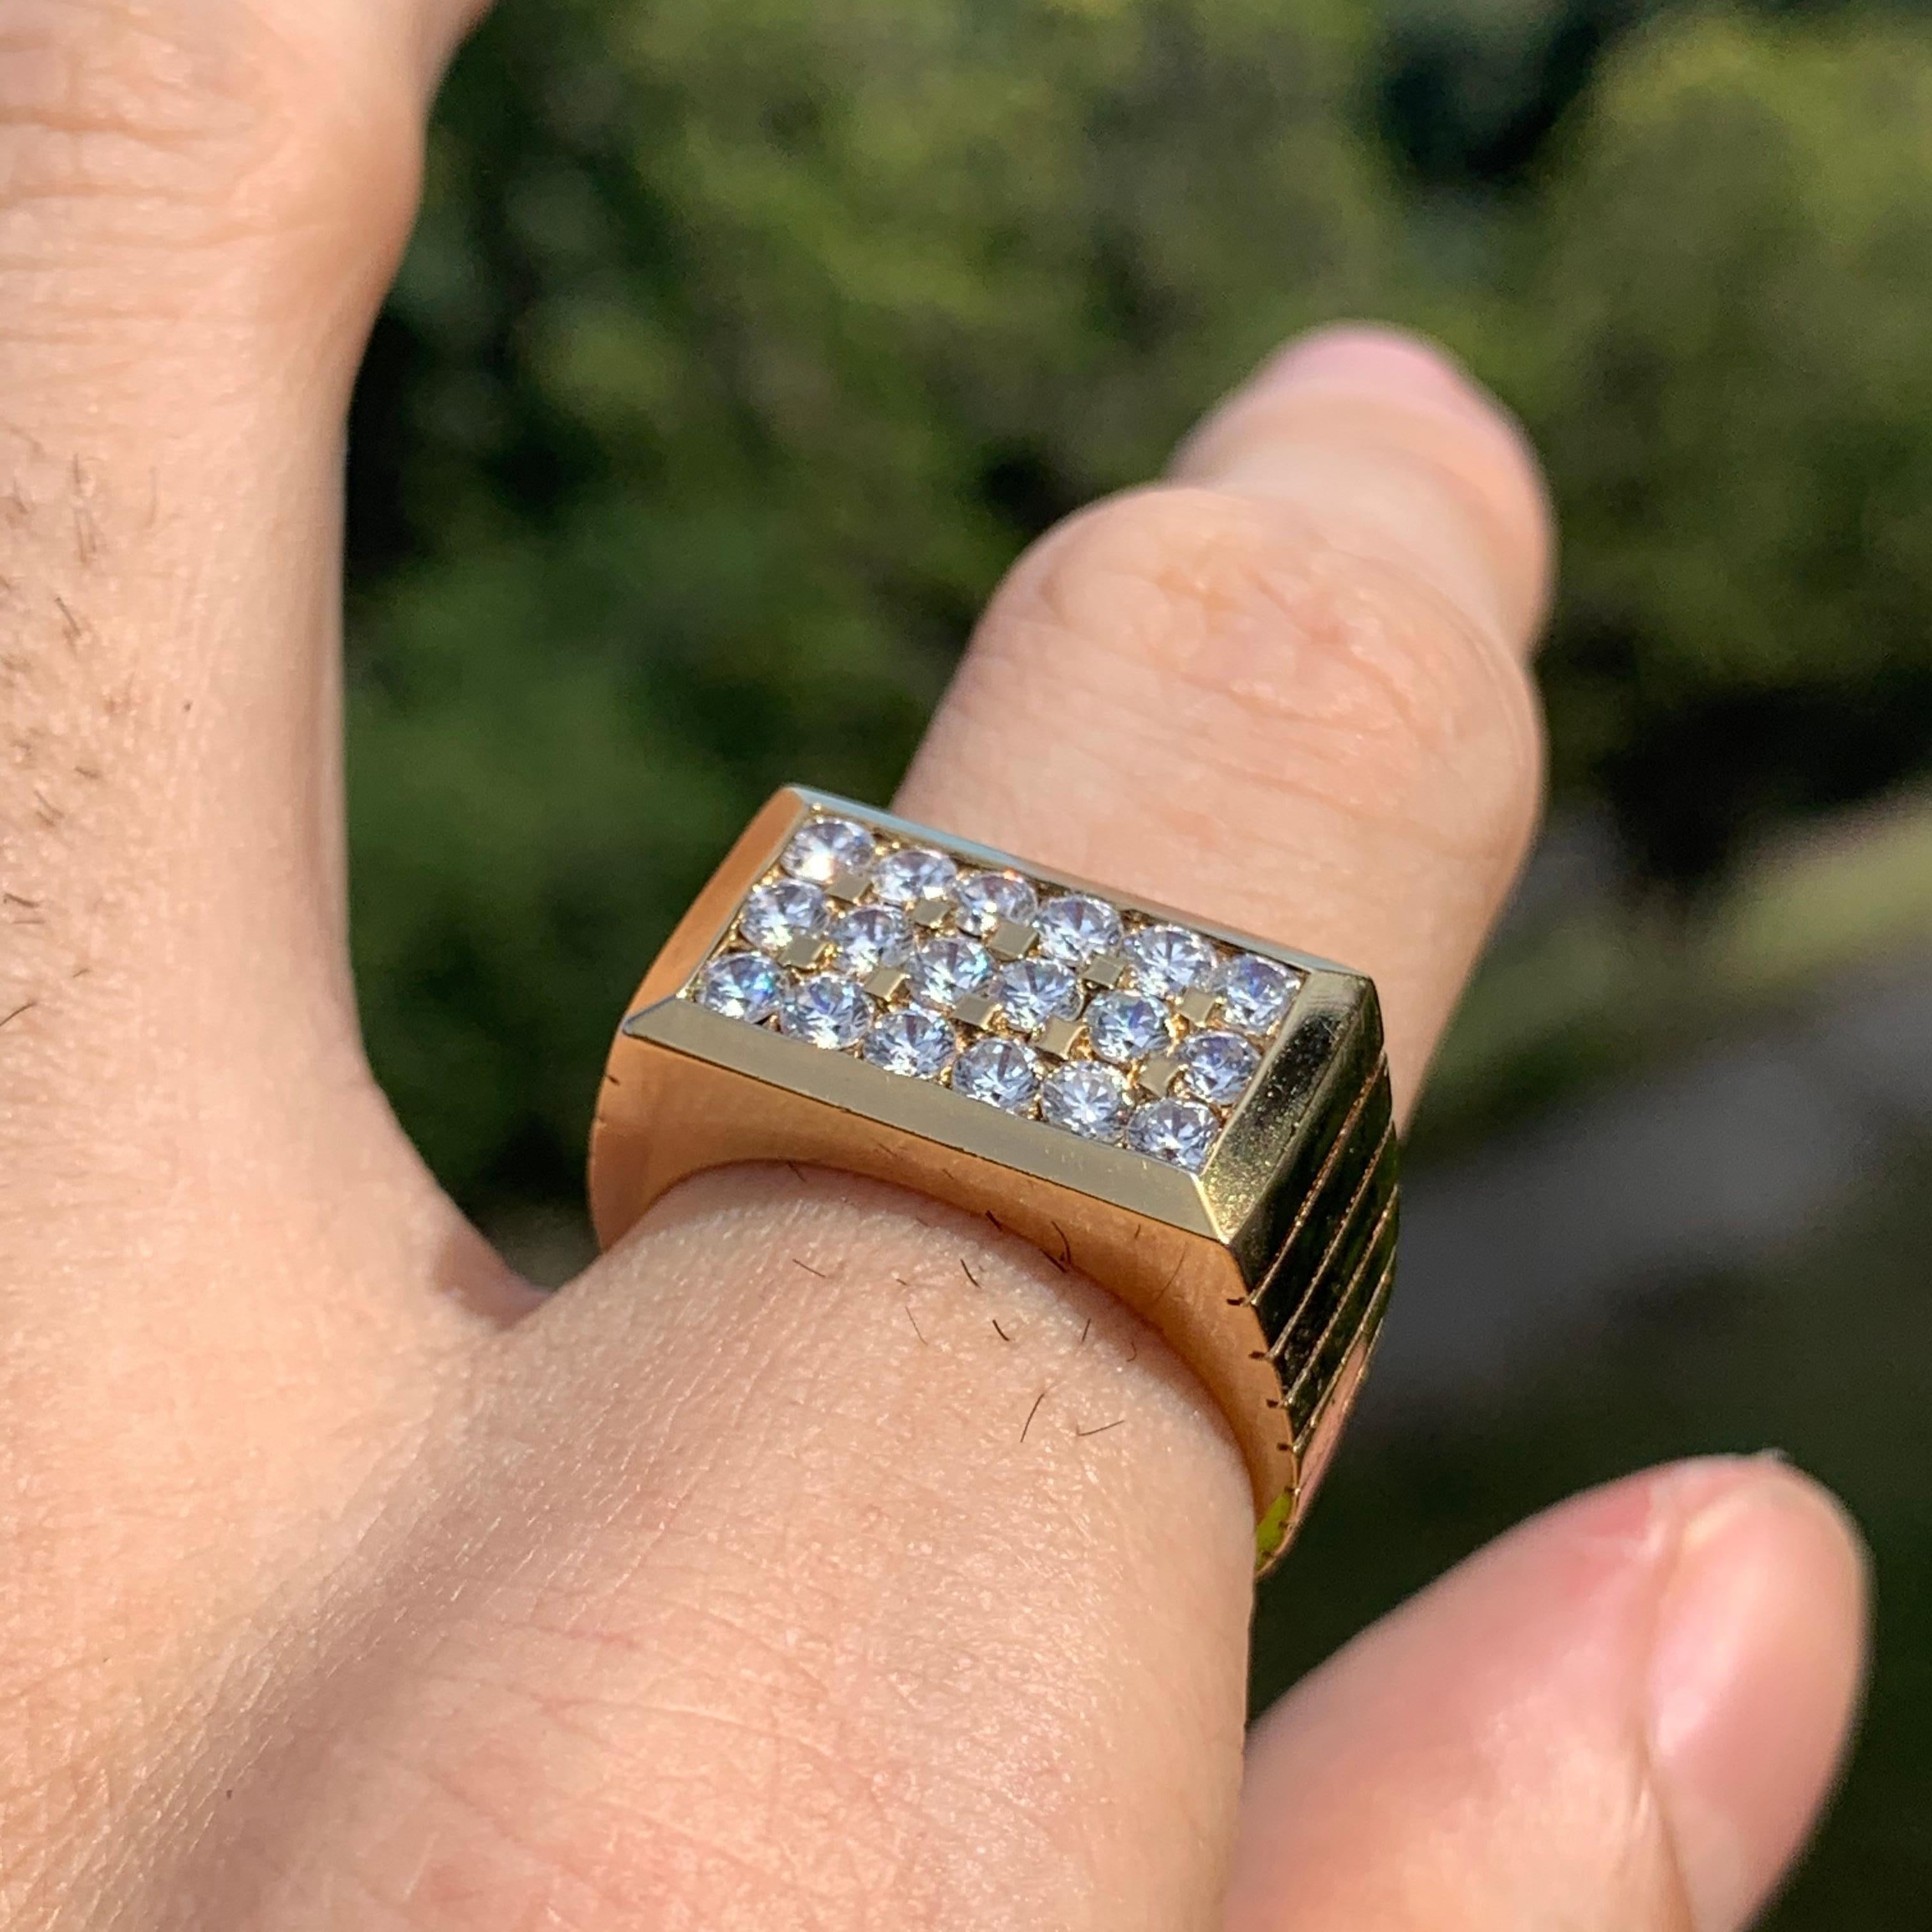 All Of Our Pieces Are 100% Made In Los Angeles, California.

Want This Beautiful Diamond and Gold Ring But Want To Save Money? We Can Make You This Real Gold and CZ ,  Your Cost is only $2300

If Item Is Already Sold It Will Be Customer Made To